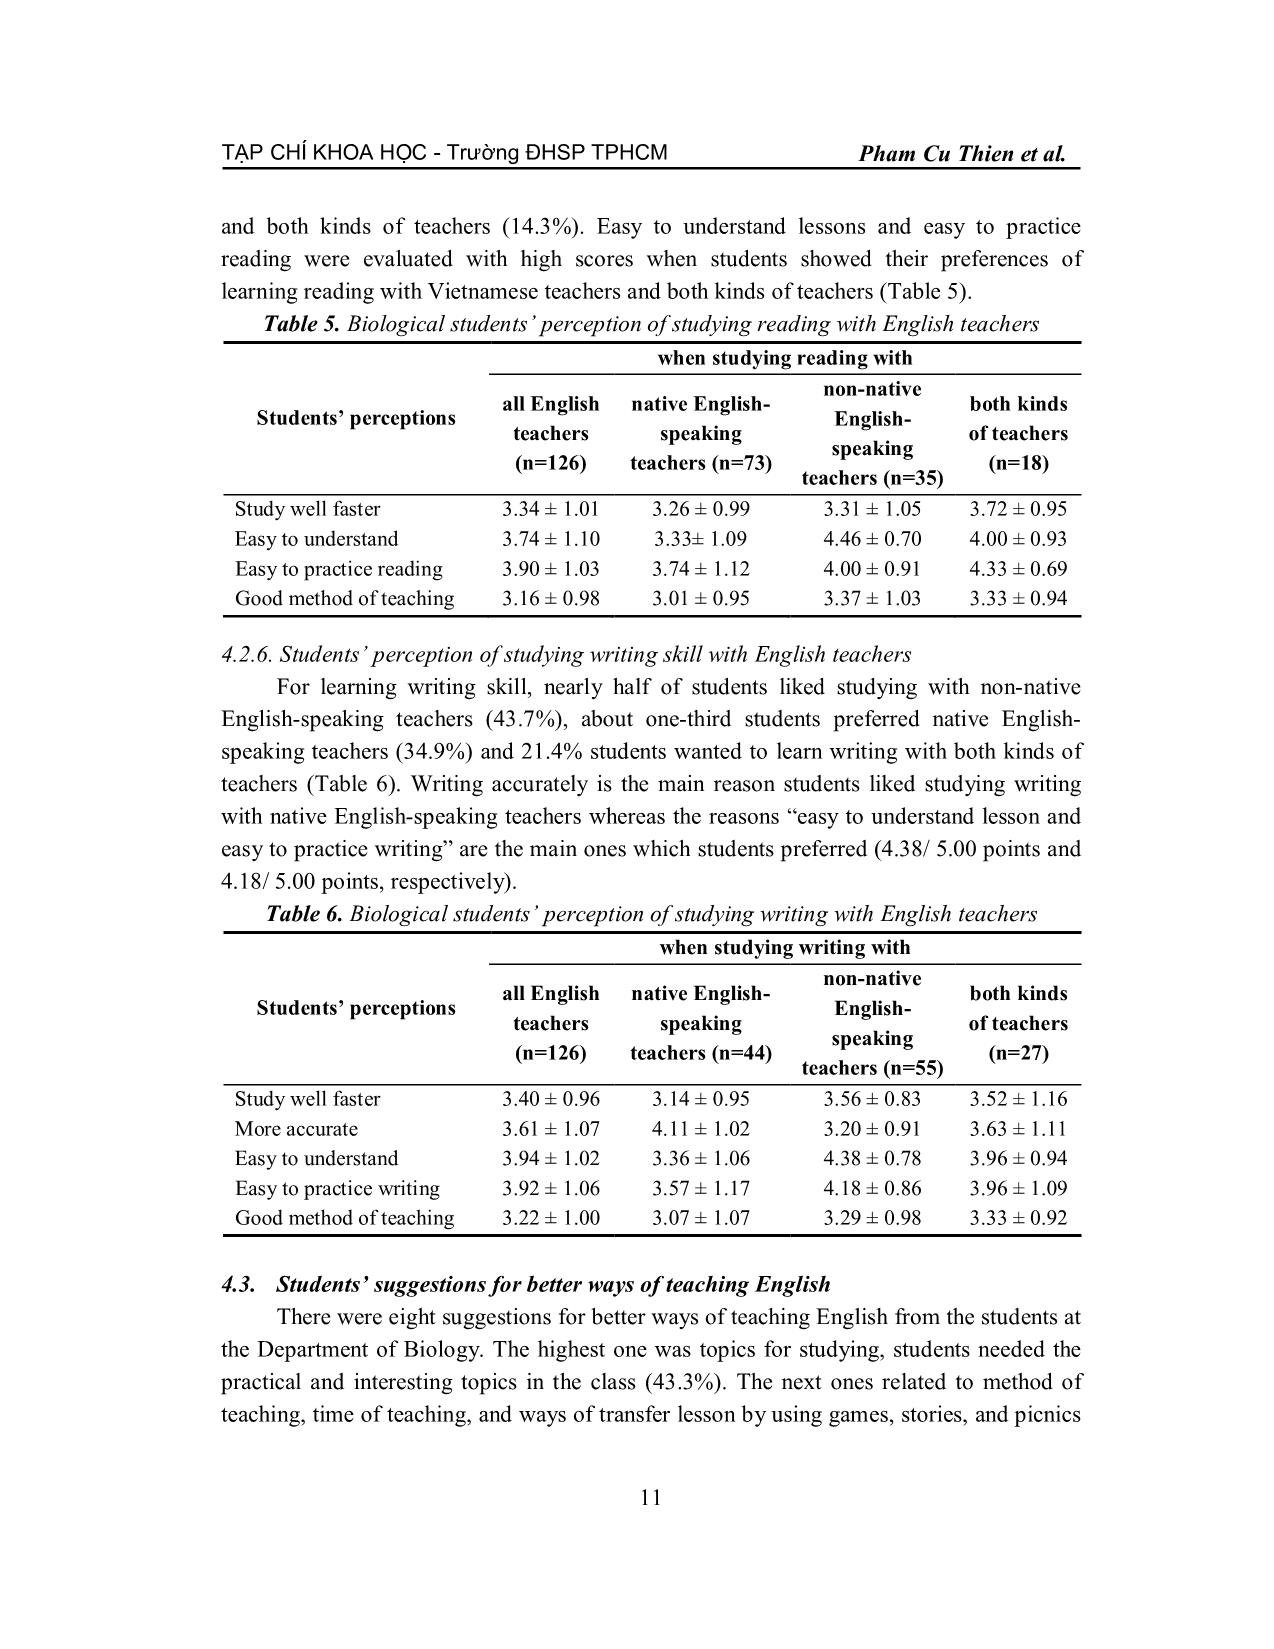 Biological students’ perception of the advantages and disadvantages of learning English with native and non-native English-speaking teachers trang 7